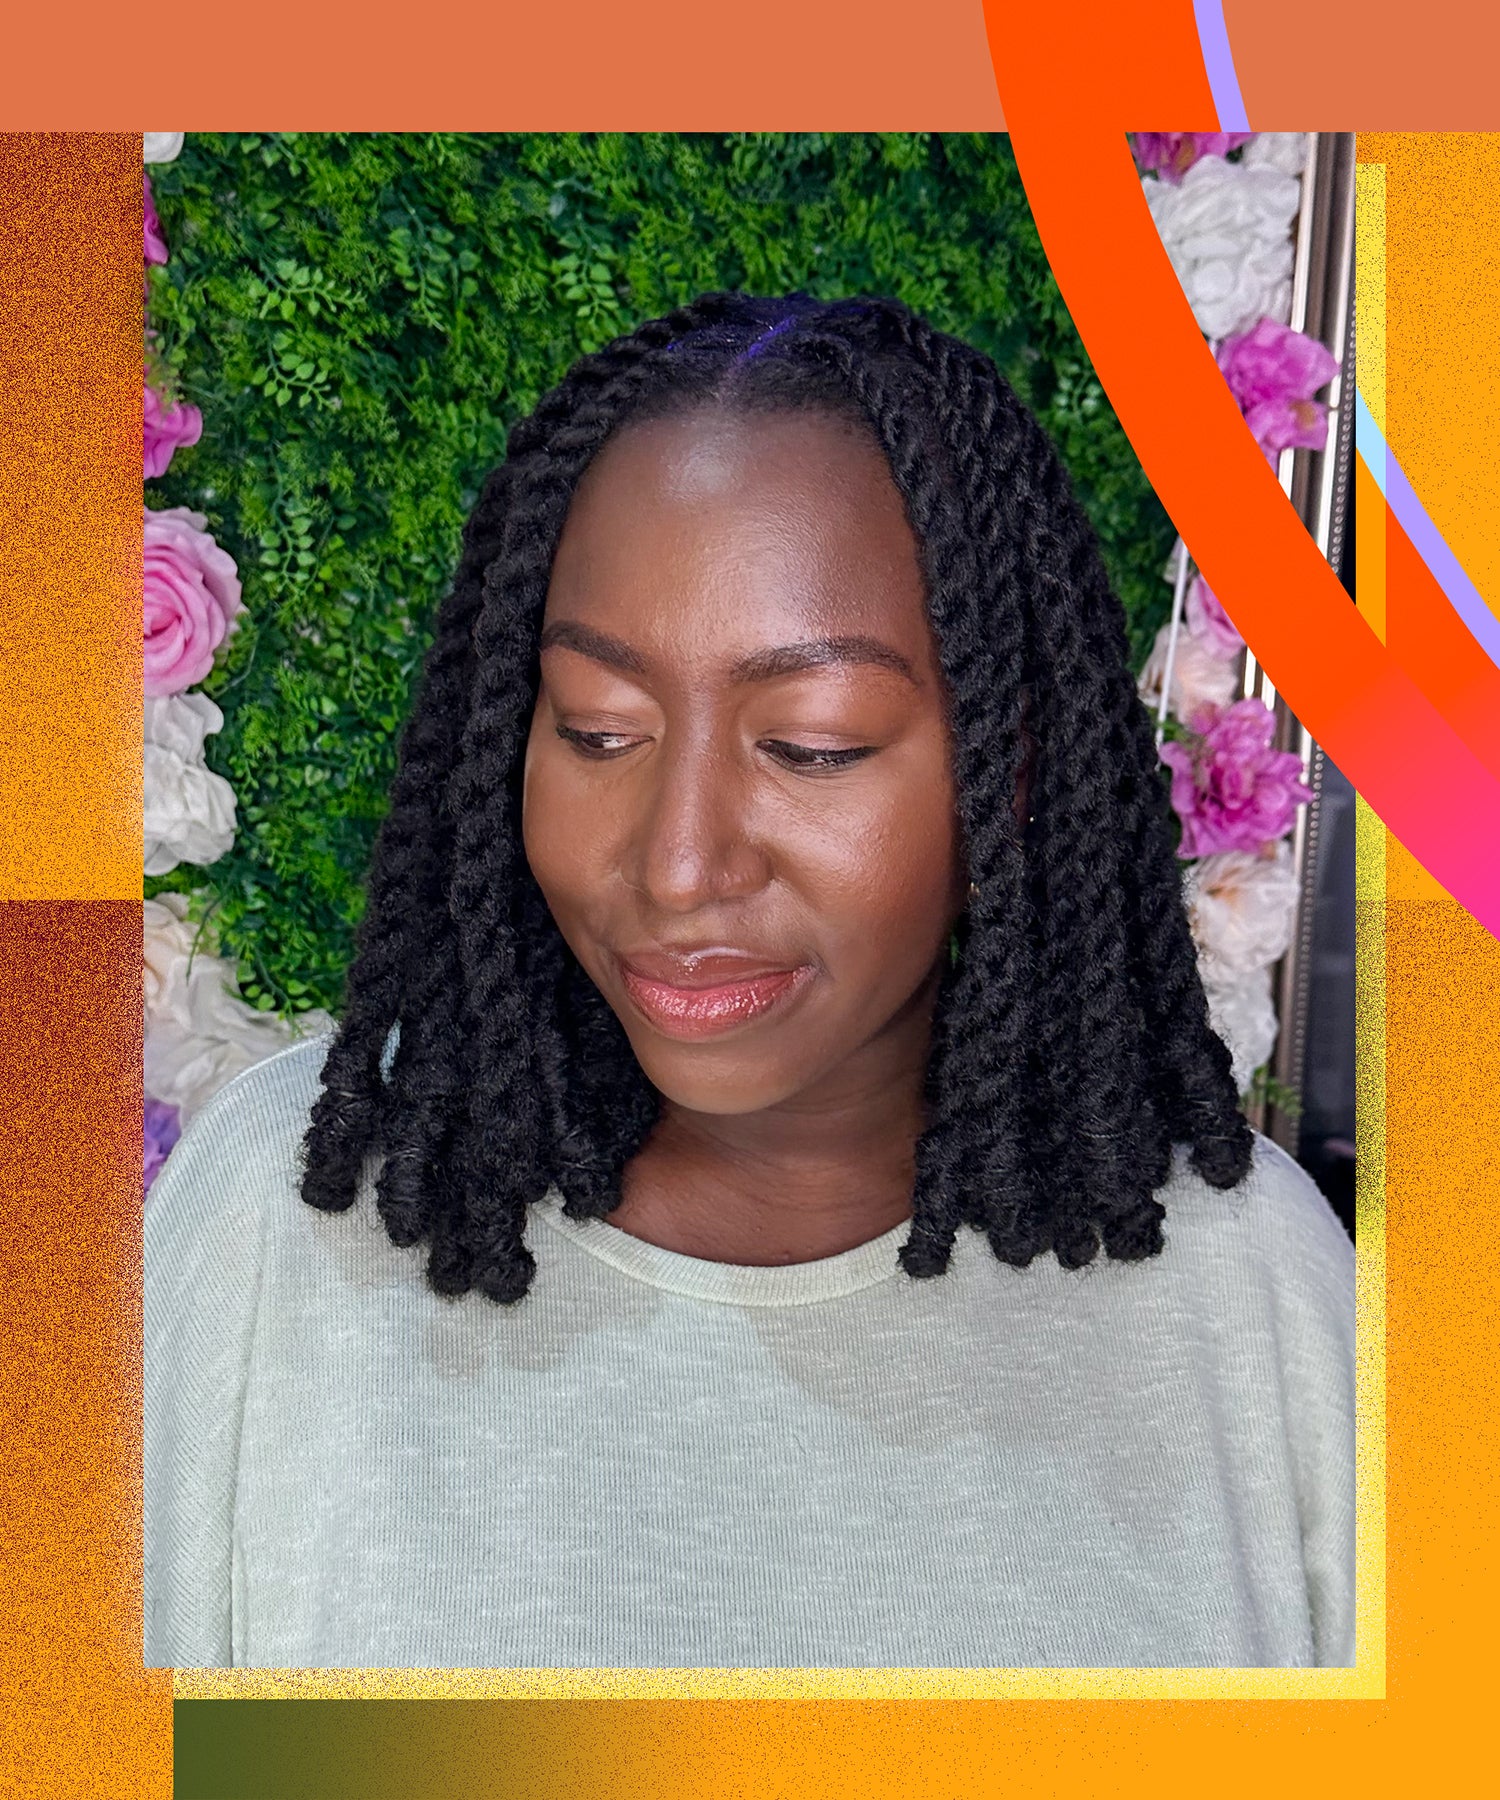 Do crochet locs get thicker over time? I've had my locs recently